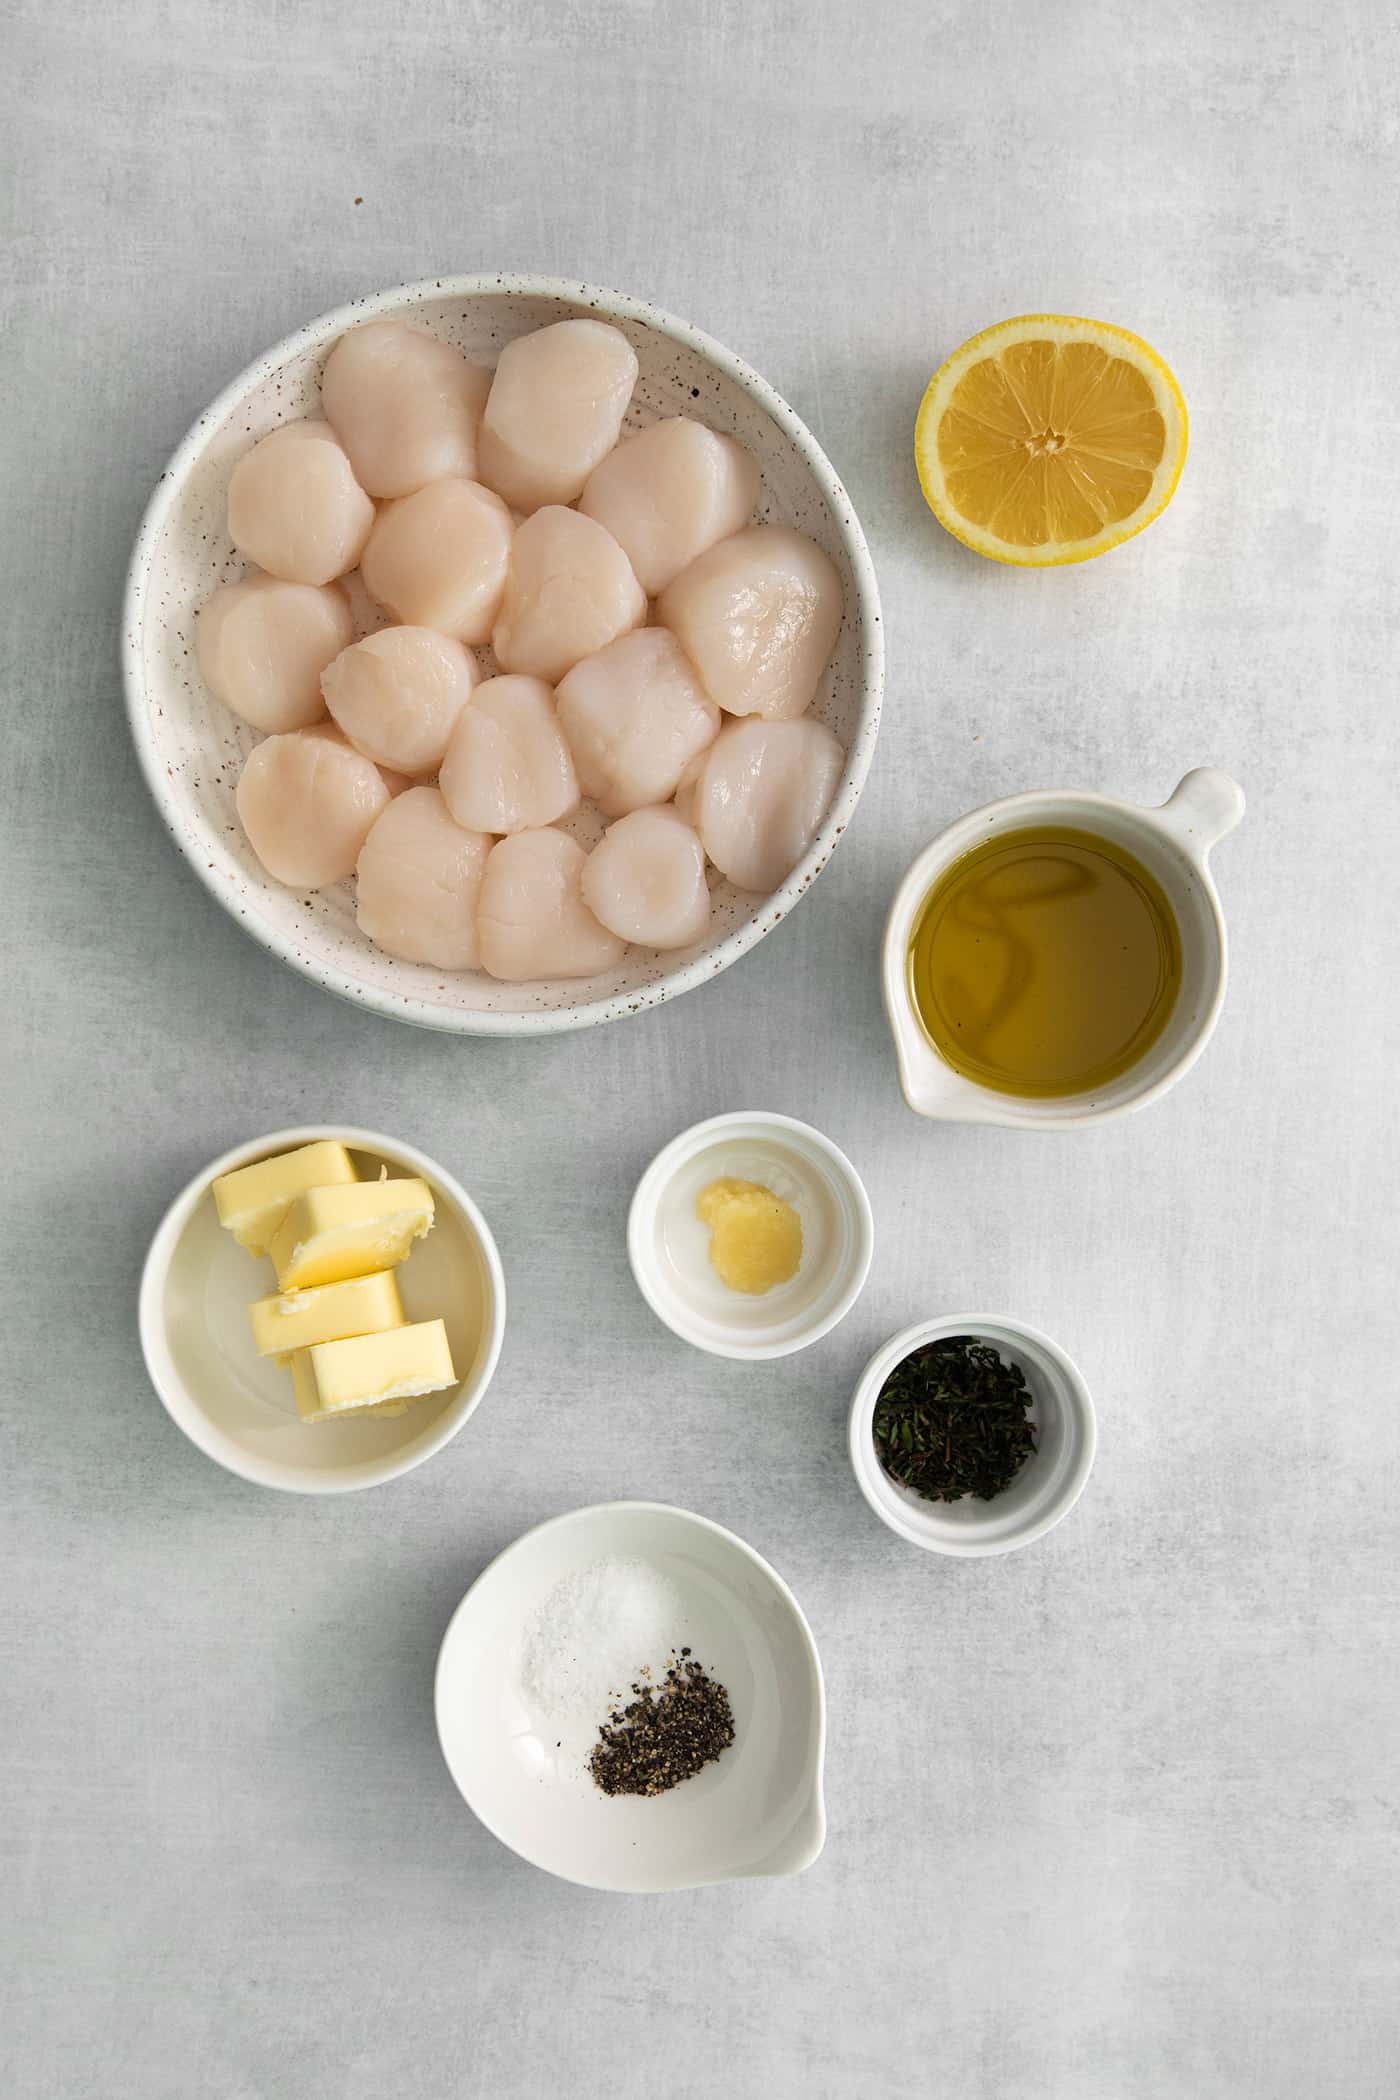 Grilled scallops ingredients